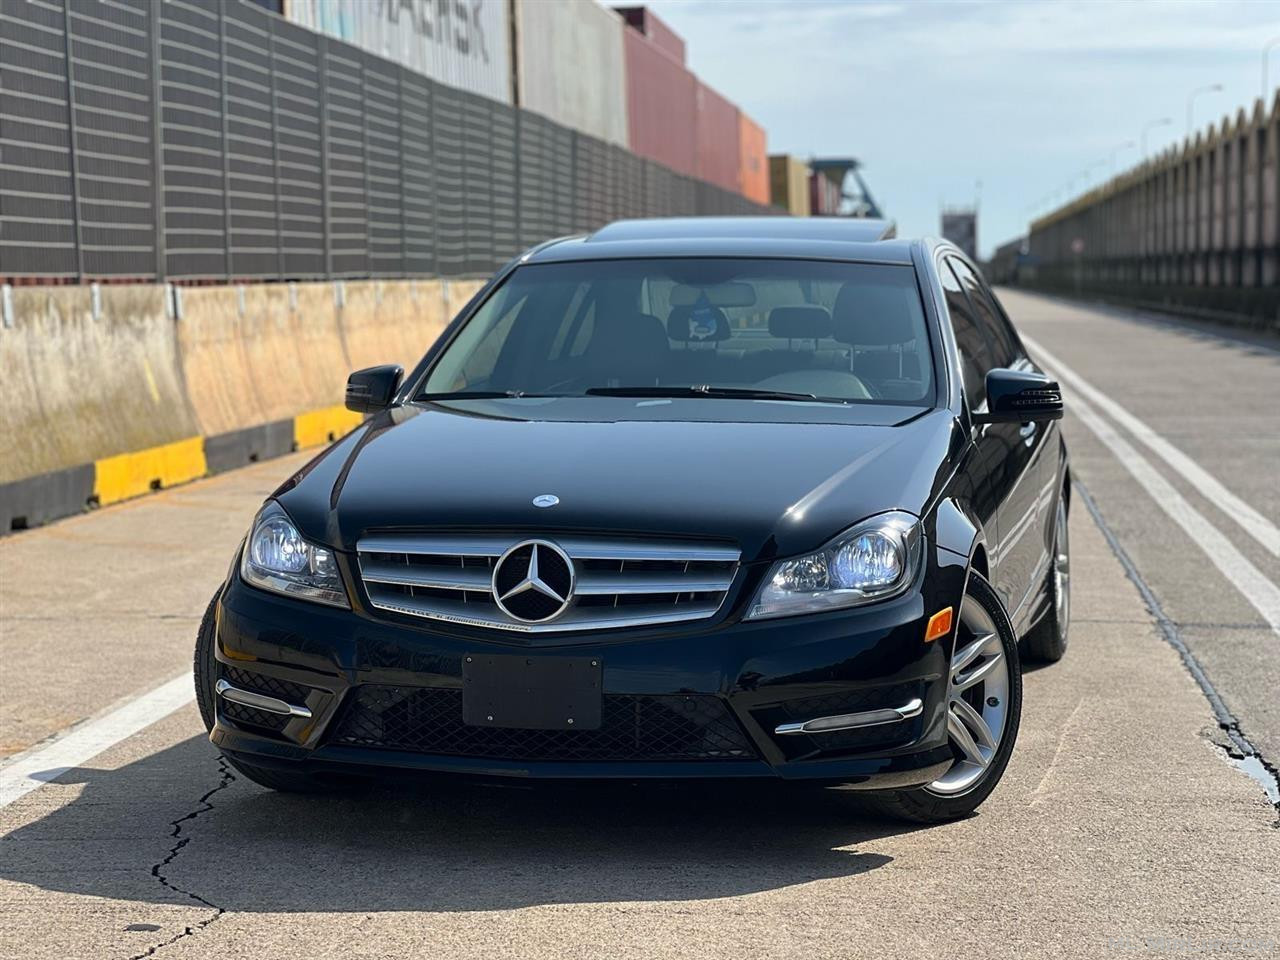 Mercedes Benz C 300 4 matic Amg Package 2012